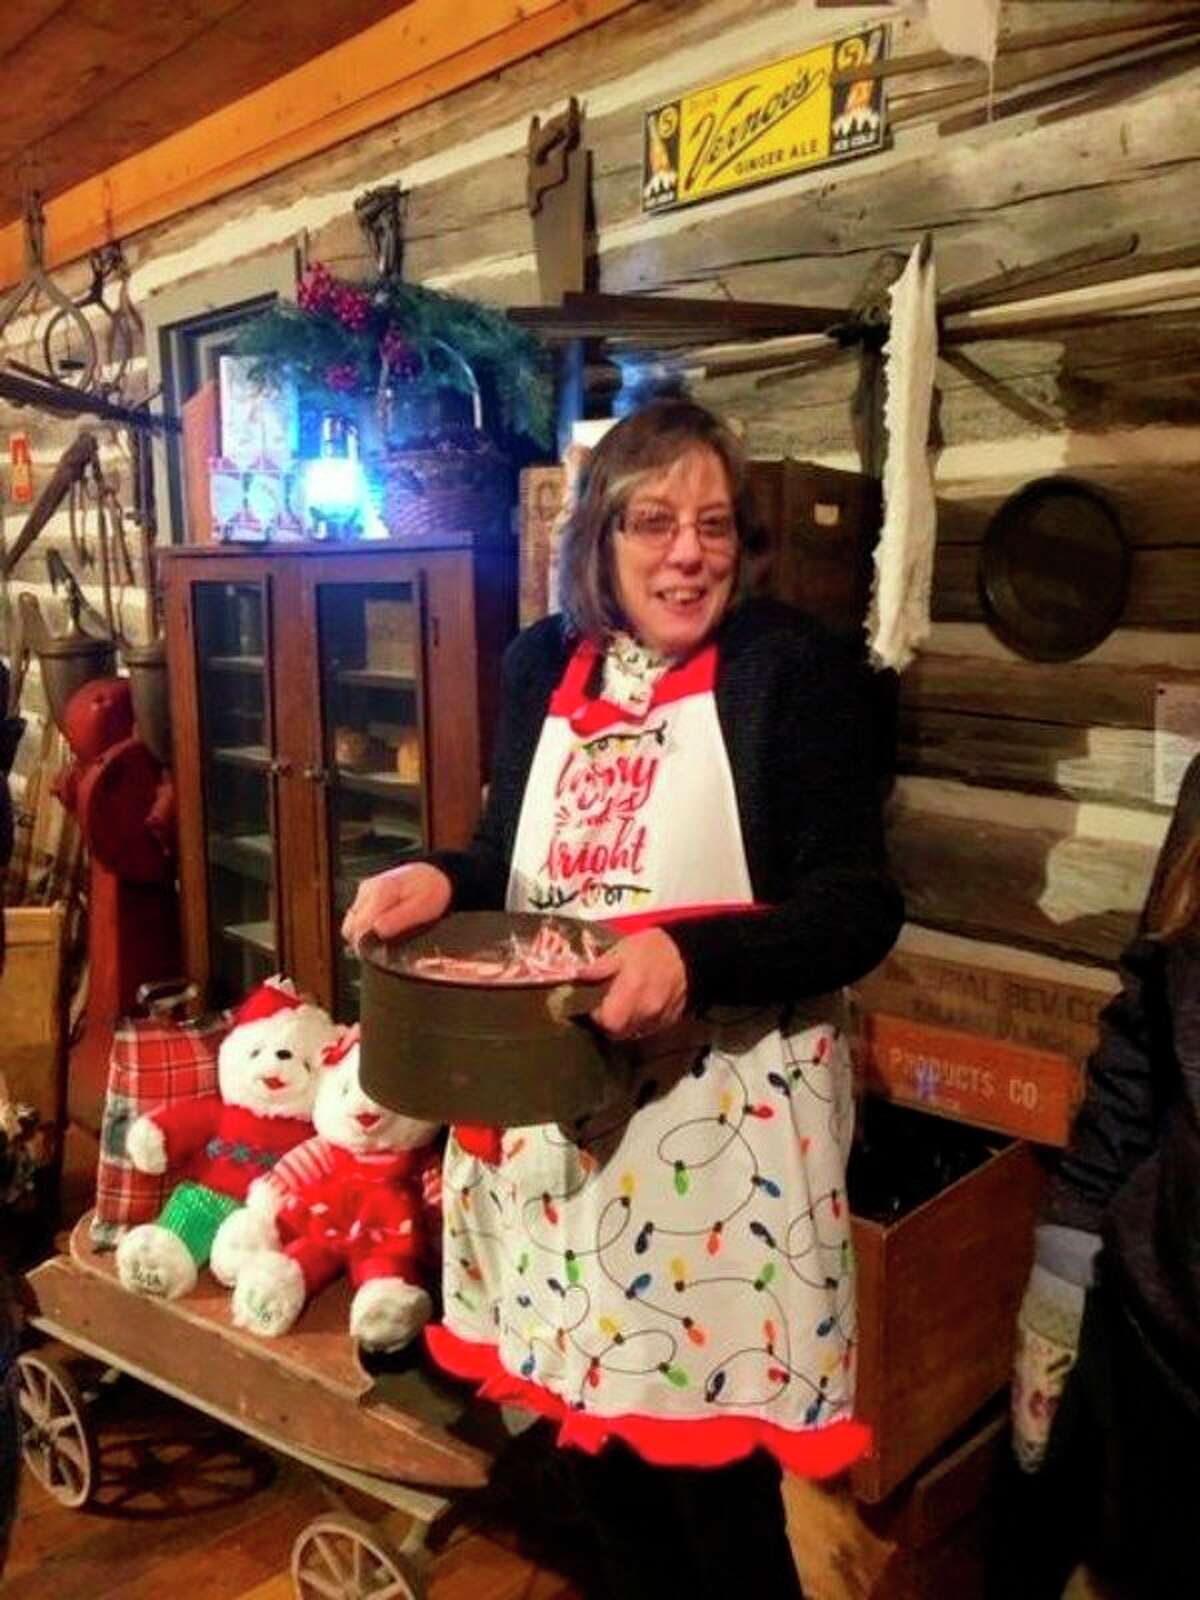 The Historic White Pine Village's White Pine Christmas brings together the traditions of the past and present. (Courtesy photo)